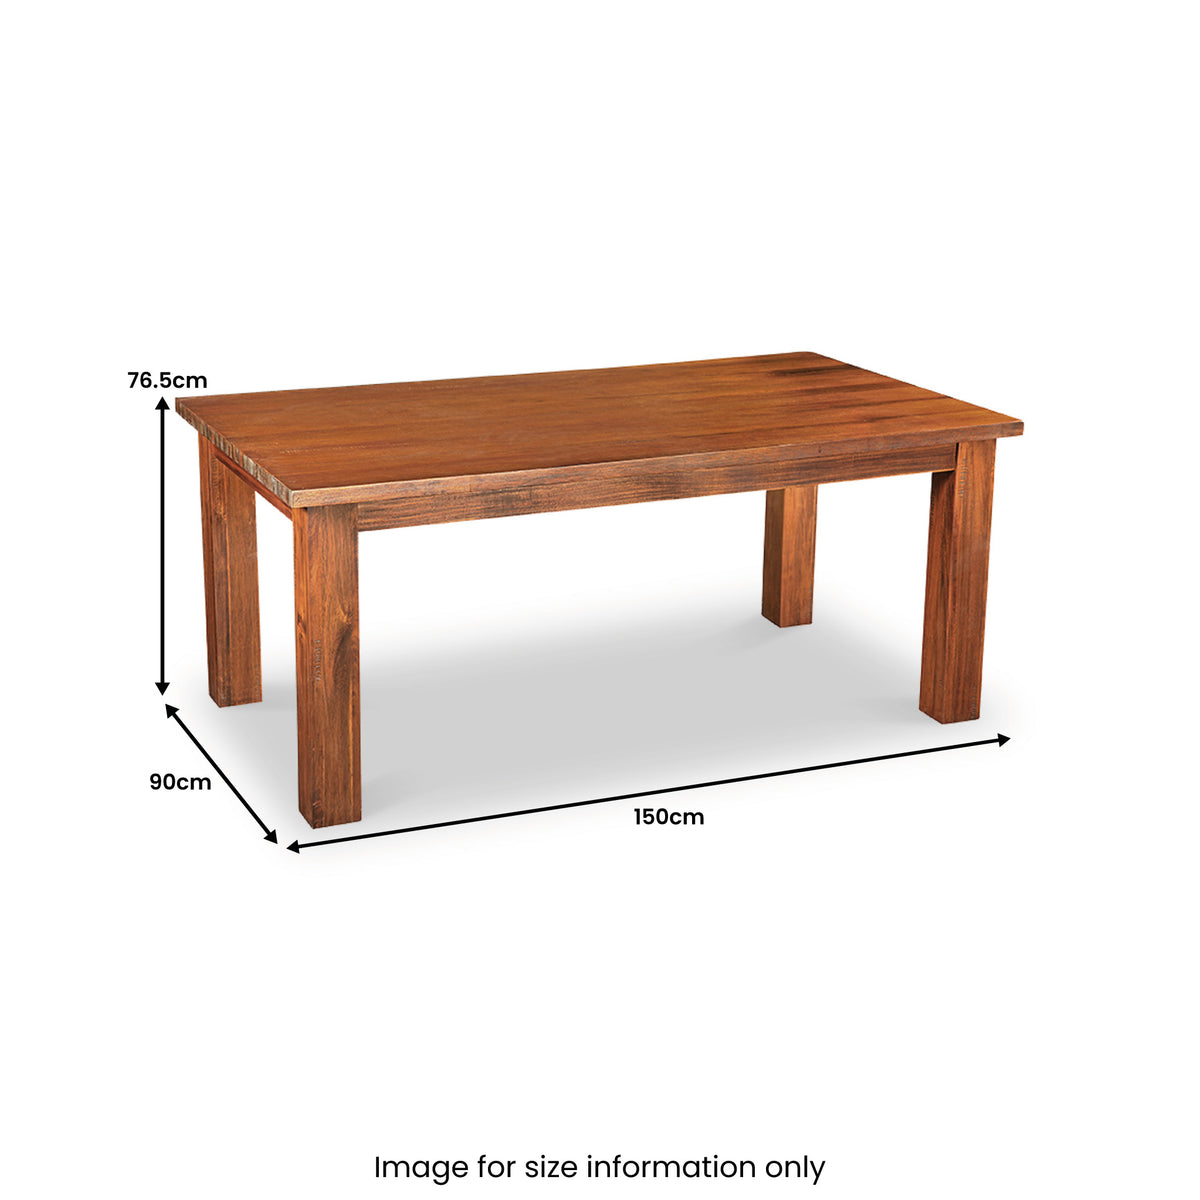 Ladock 150cm Dining Table dimensions